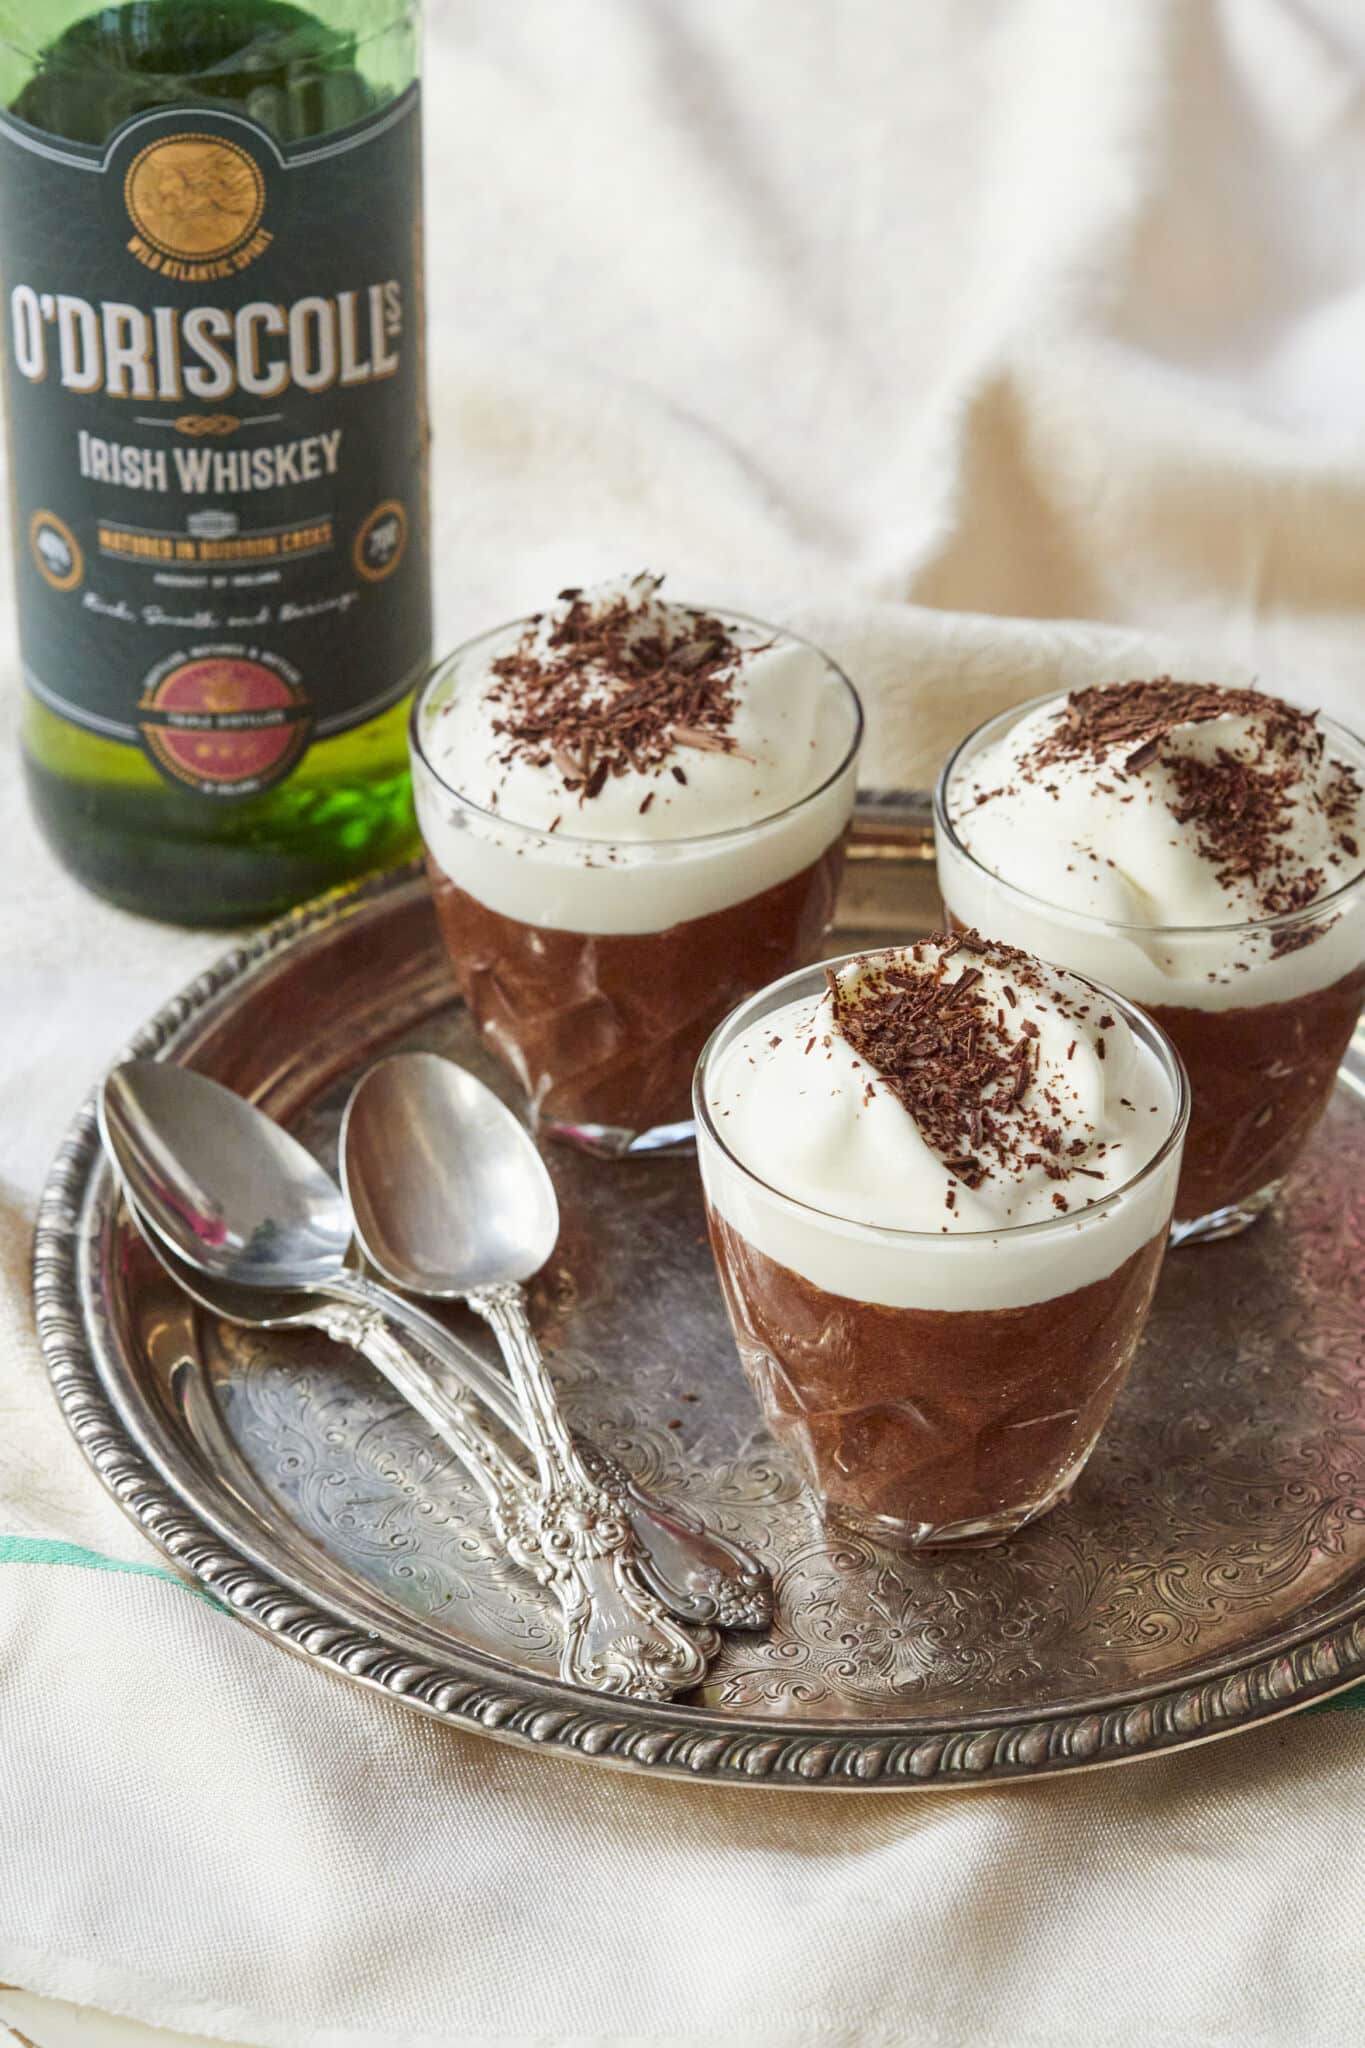 O’Driscoll’s Irish Whiskey Chocolate Mousse Recipe ready to serve on an elegant platter.